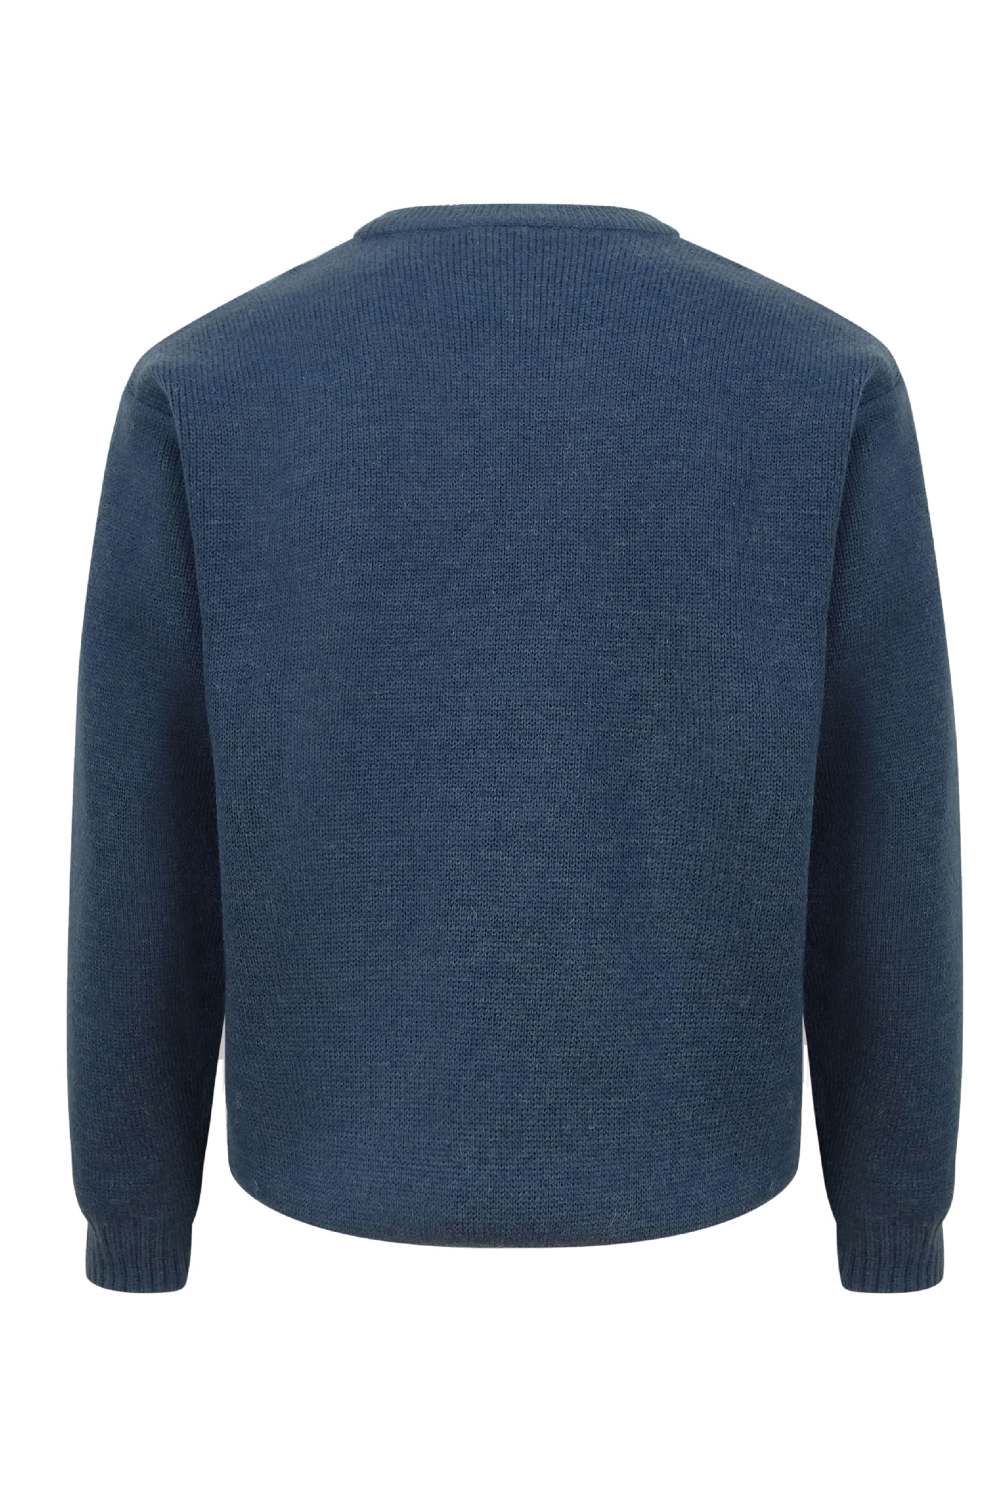 Hoggs of Fife Melrose Hunting Pullover in Marled Navy 